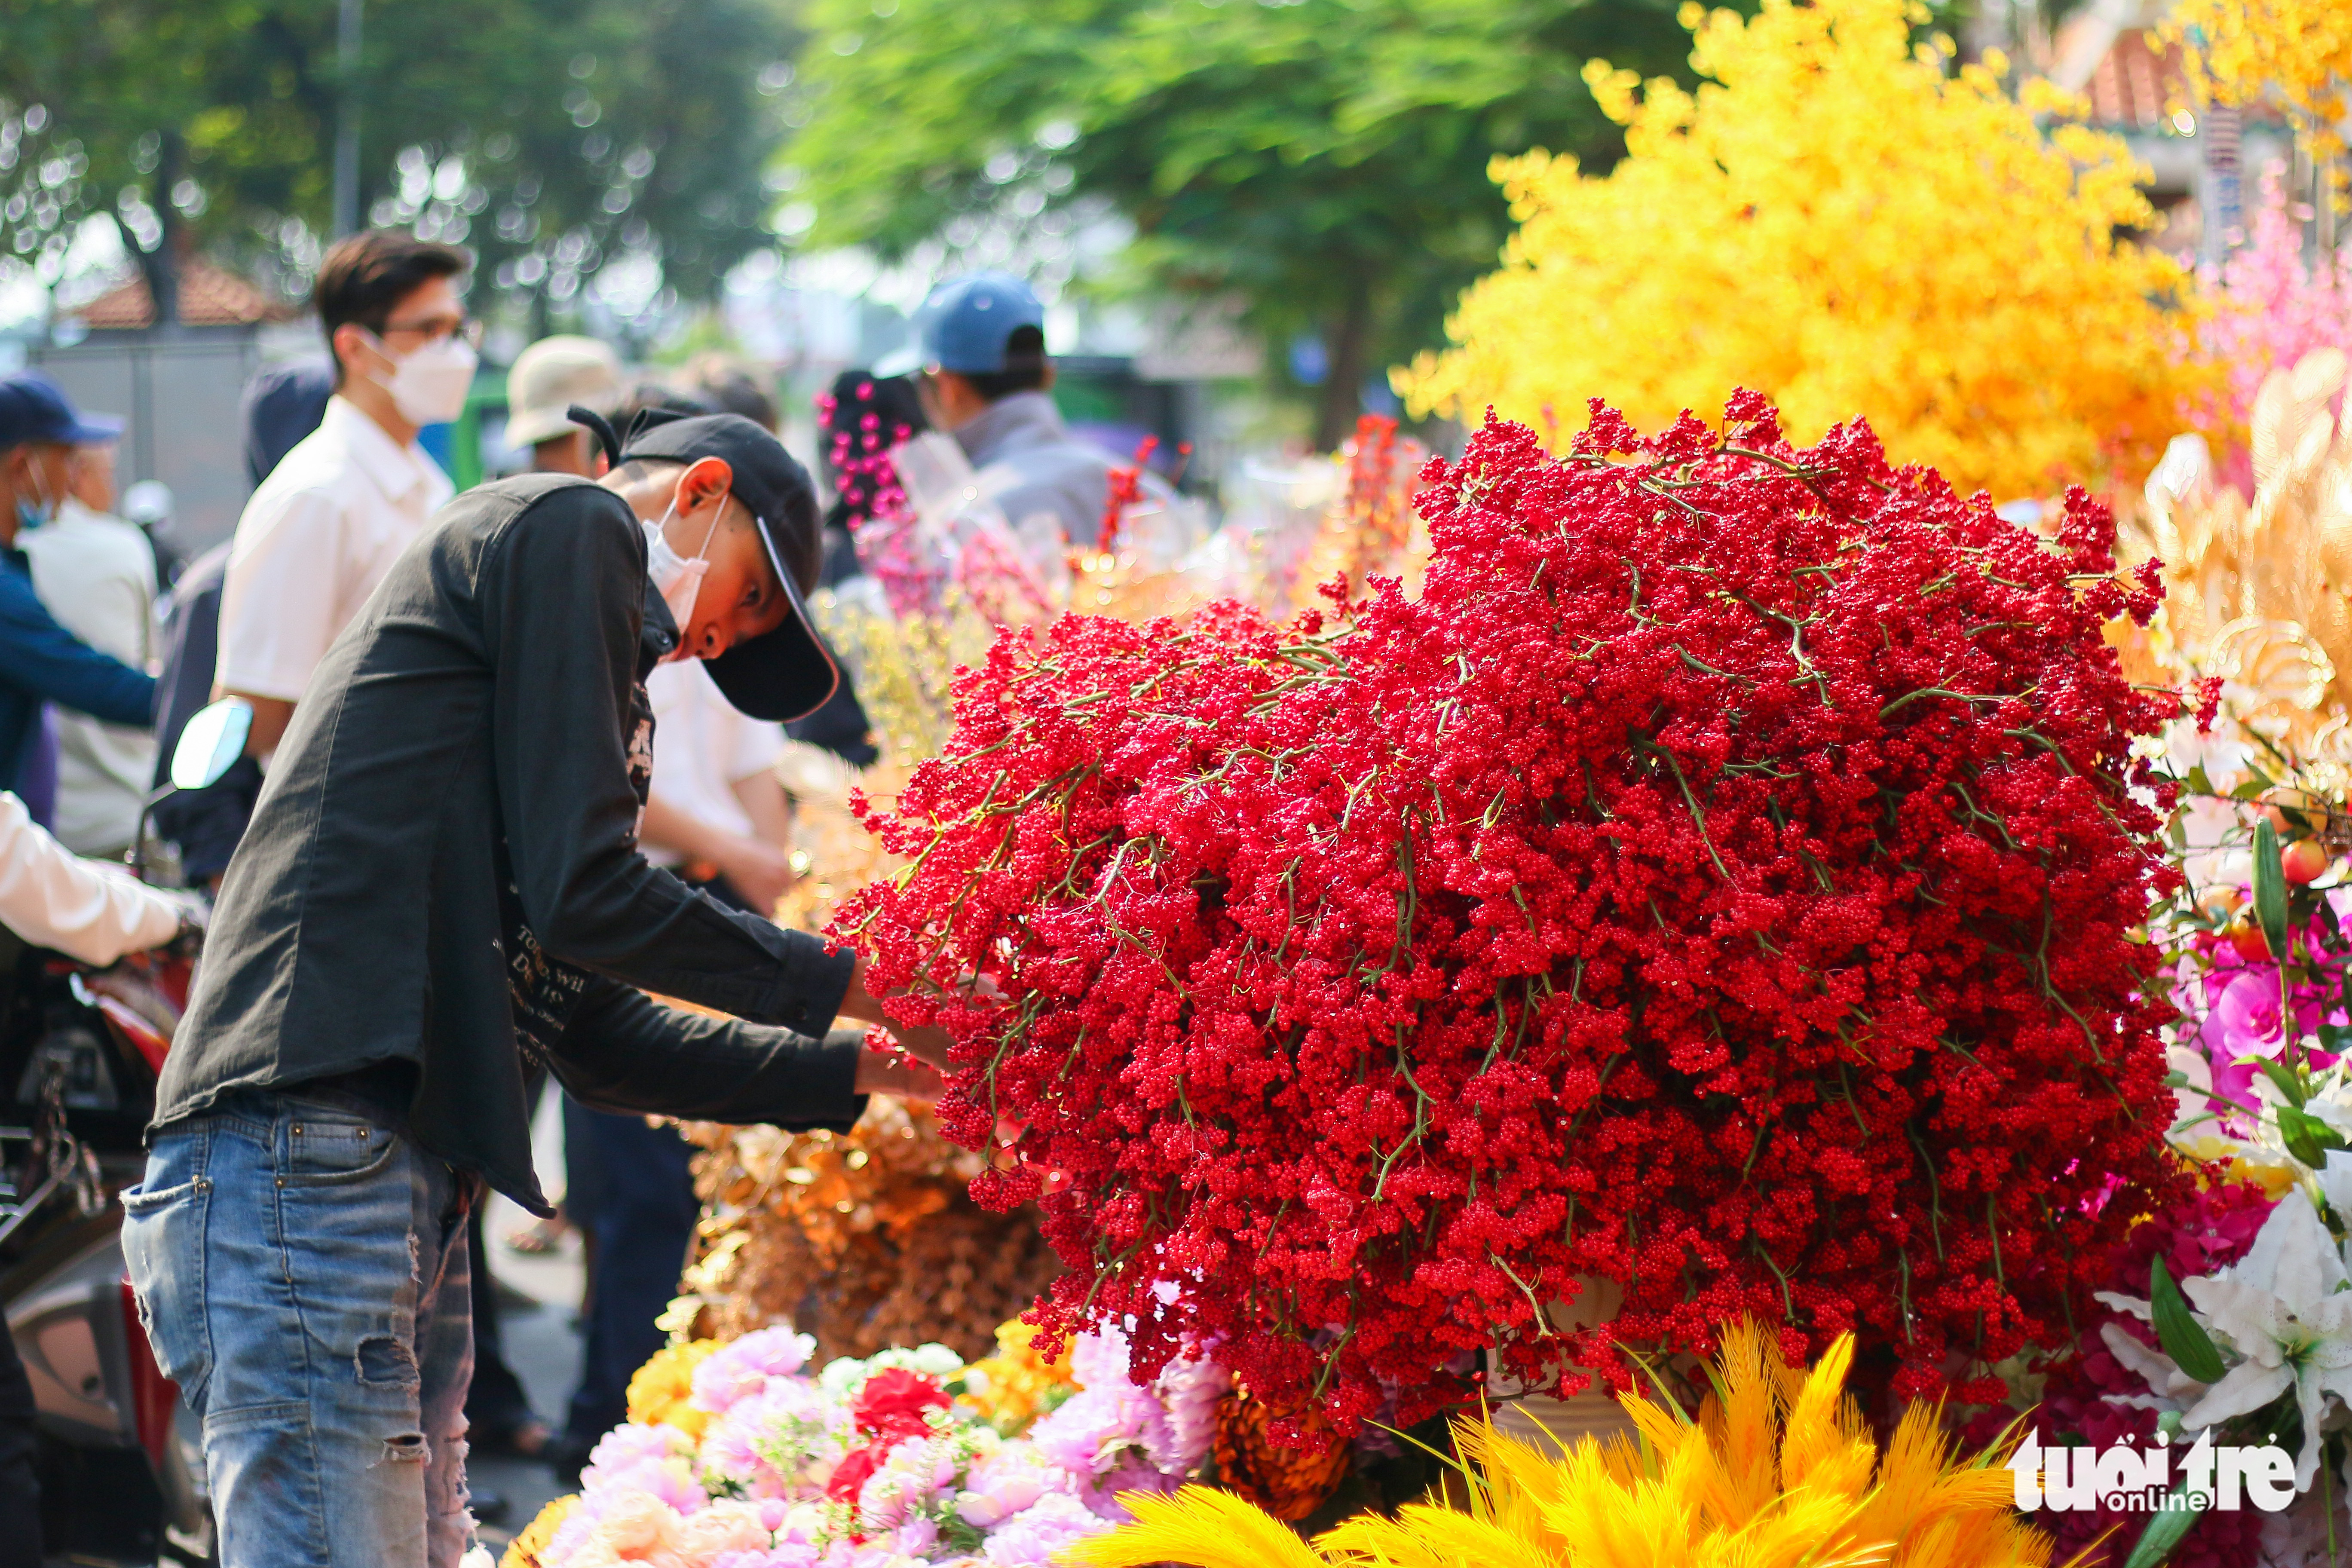 A man shops for artificial plants at ‘Tai loc’ Market on Hai Thuong Lan Ong Street in District 5, Ho Chi Minh City. Photo: Chau Tuan / Tuoi Tre